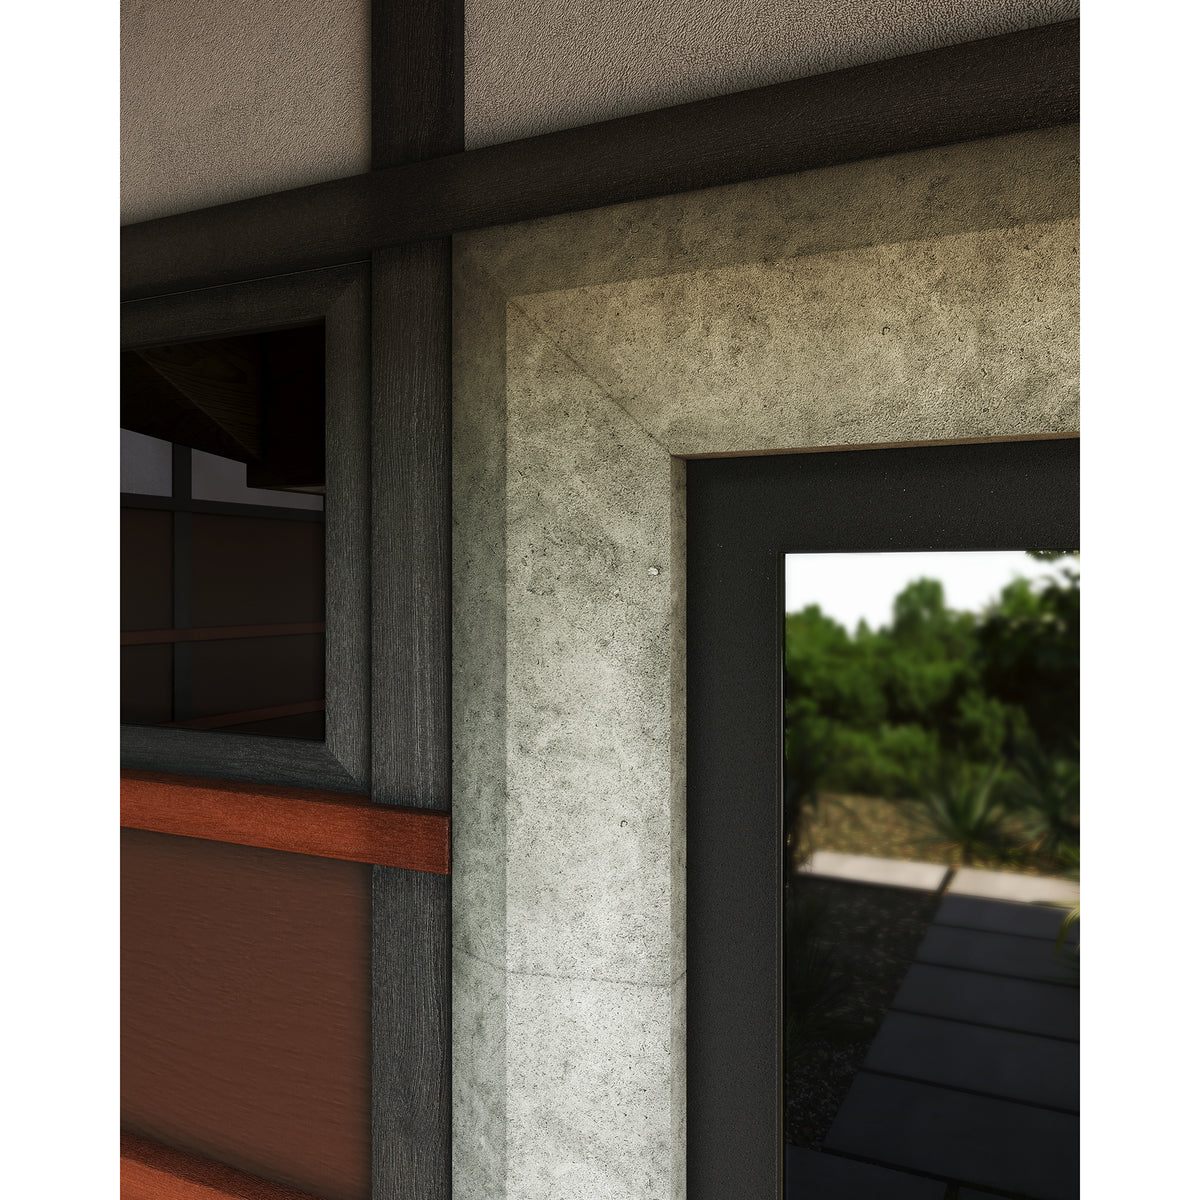 Craftsman Door Surround shown in Modern Profile with Charcoal Limestone. Main Product Slider View